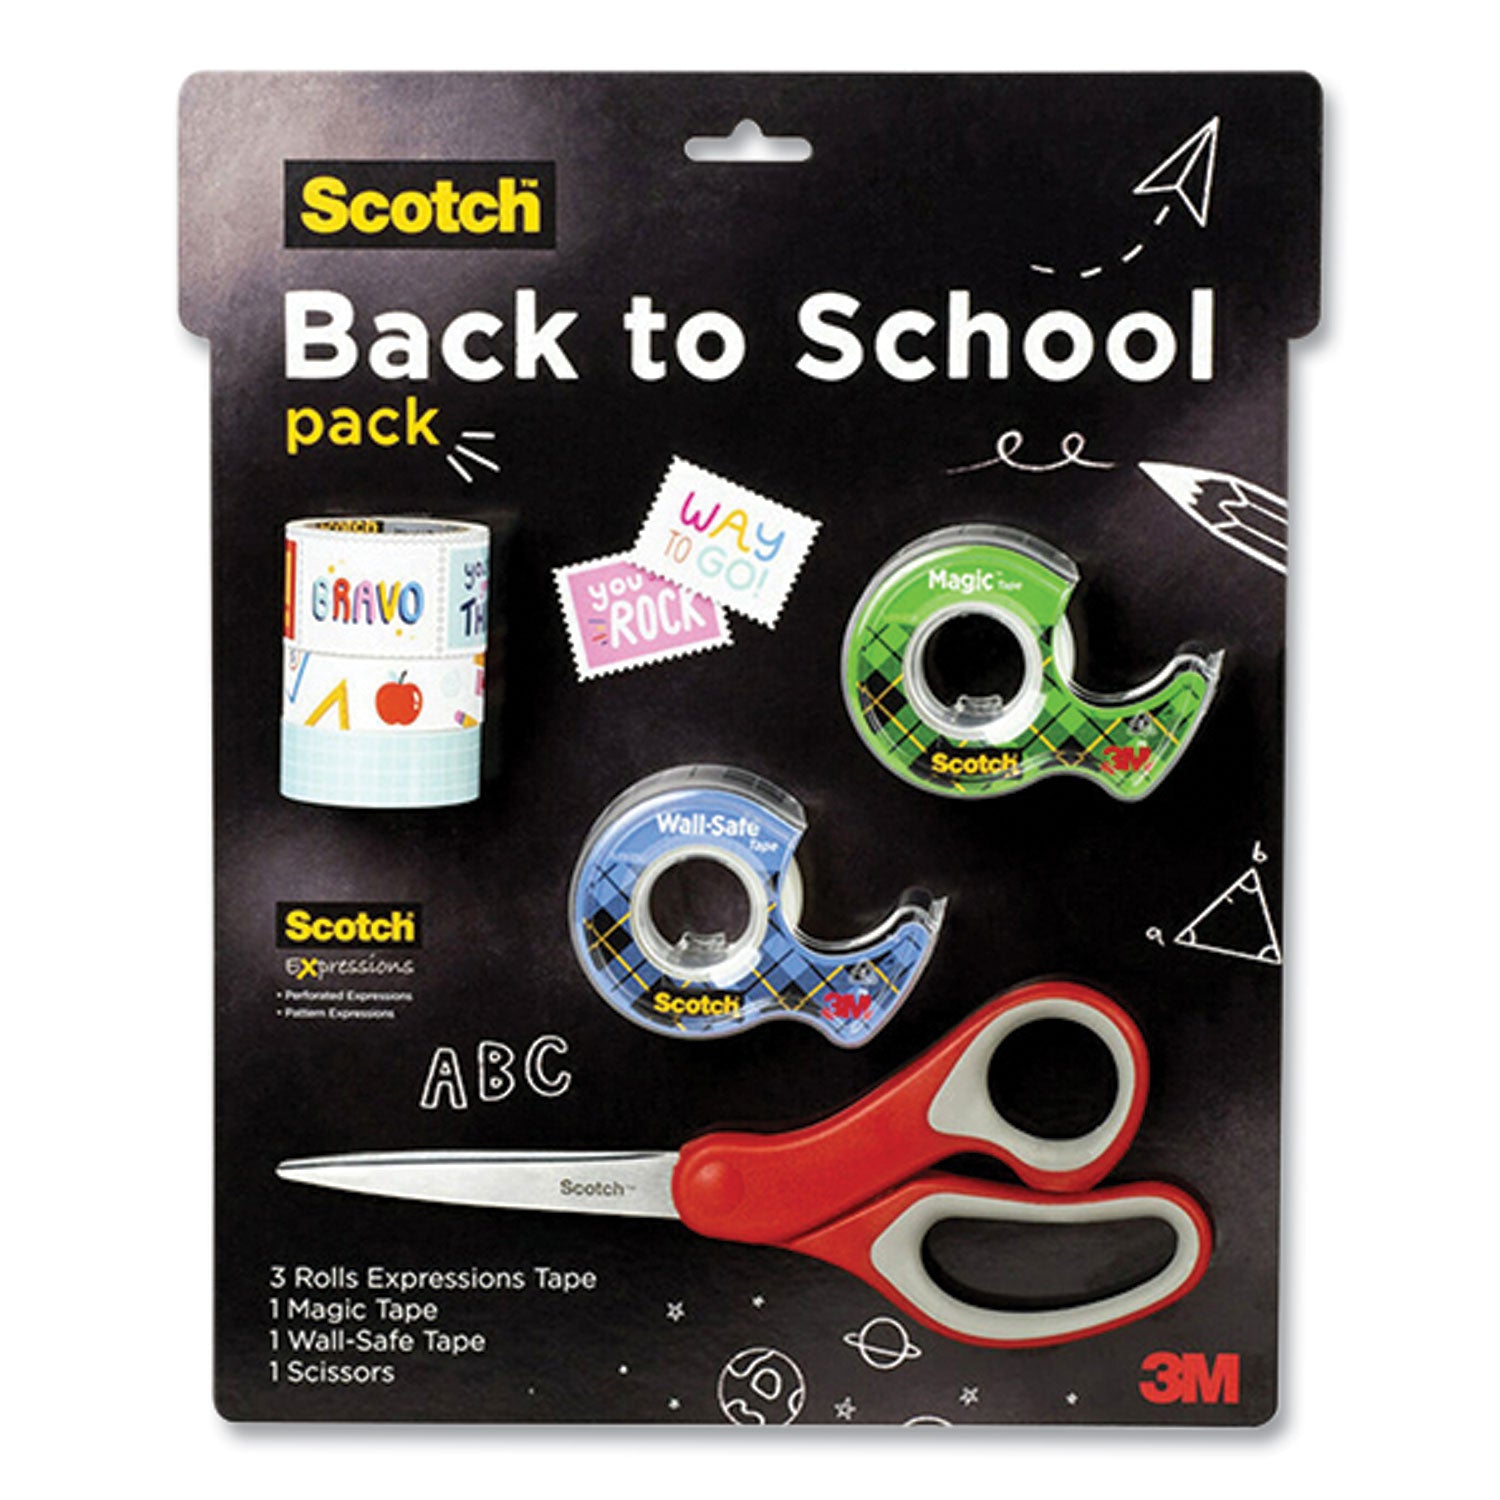 back-to-school-pack-assorted-tapes-plus-scissors-kit_mmmpkscotch21 - 1